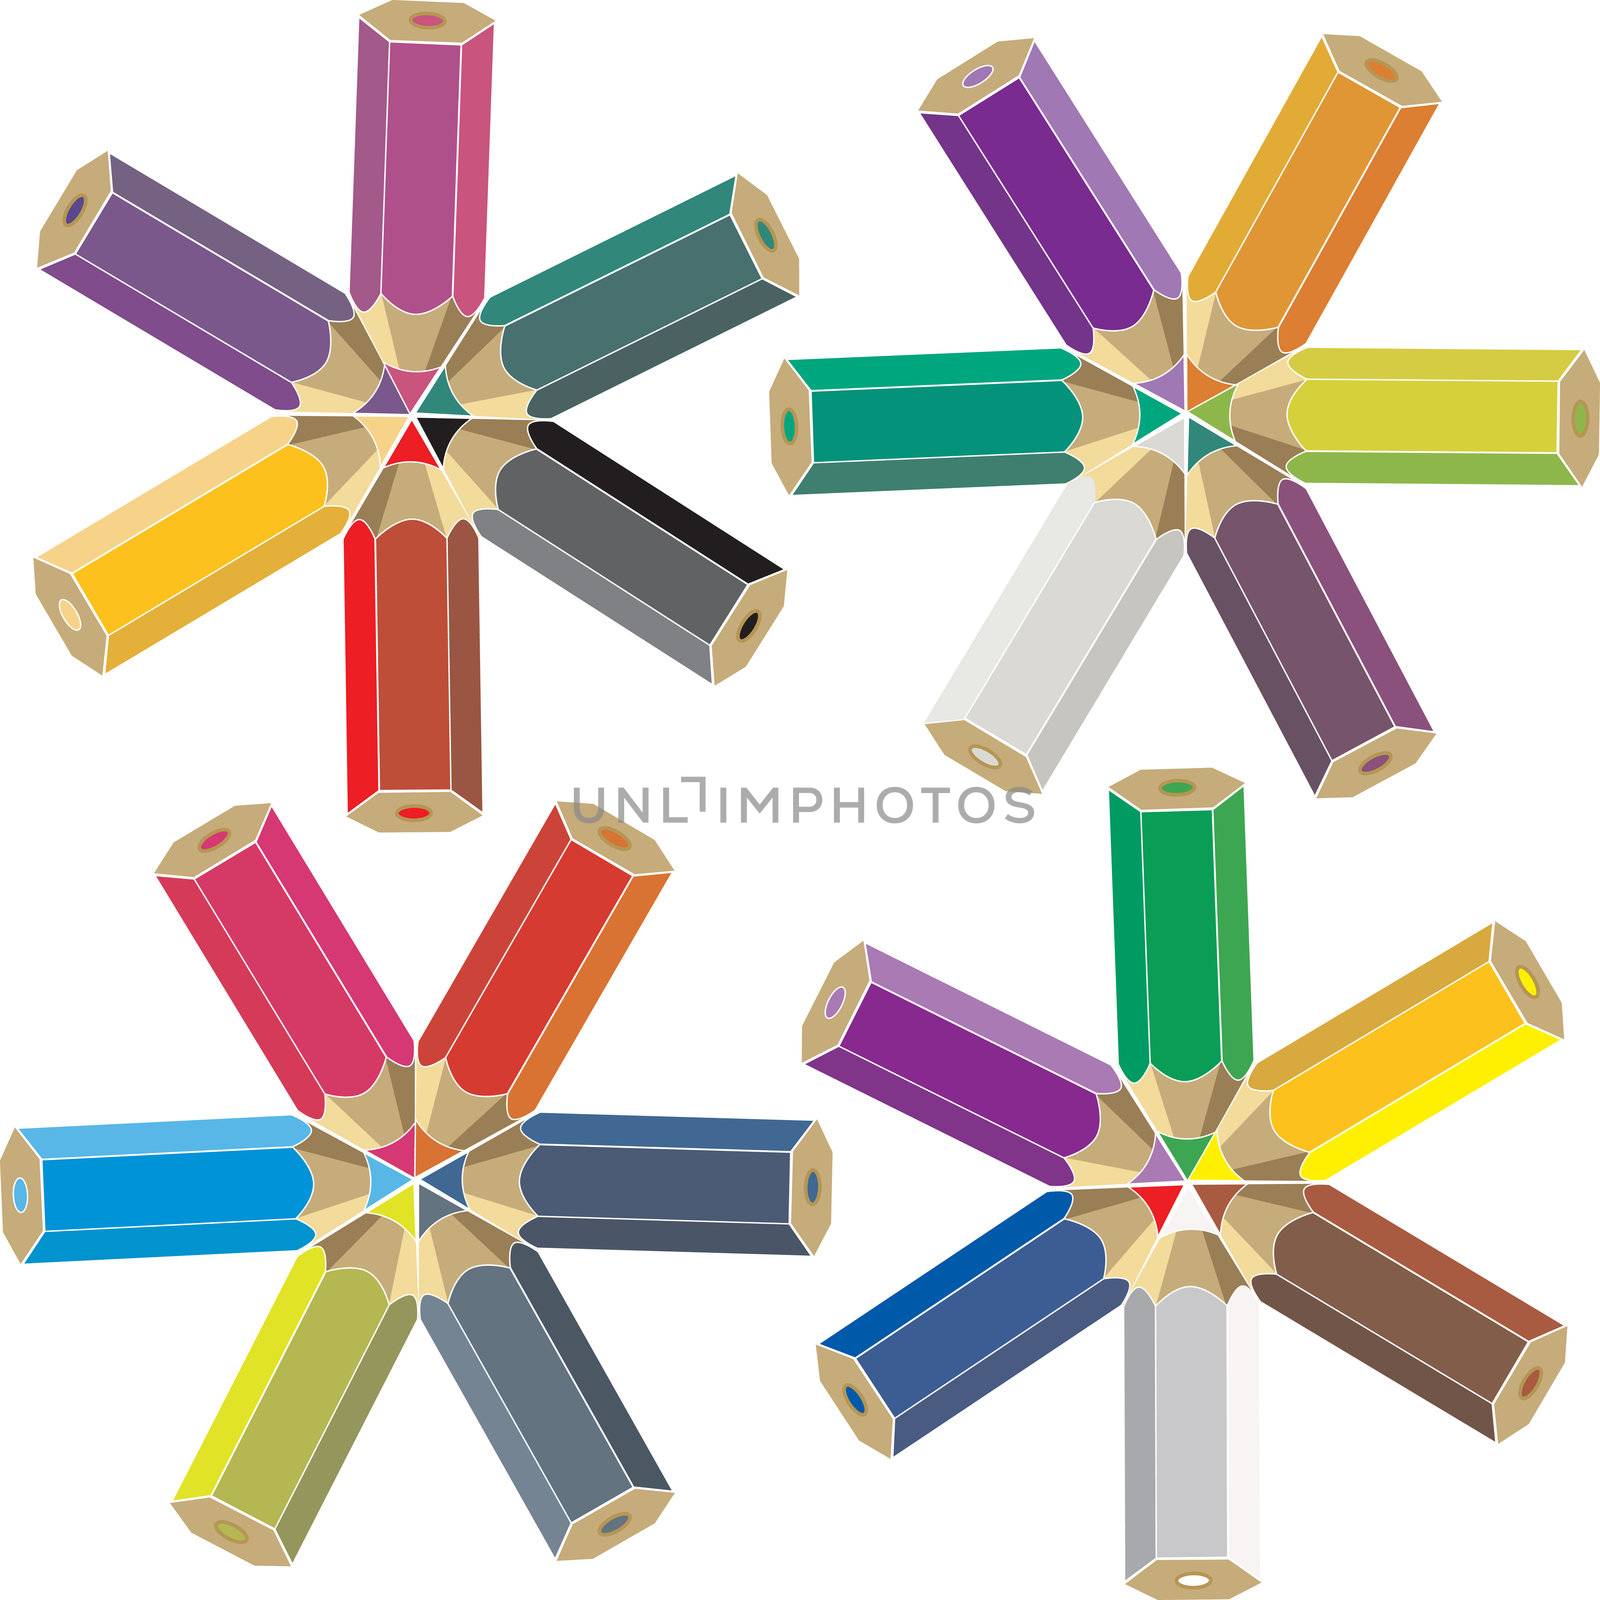 A set of color crayons against white background